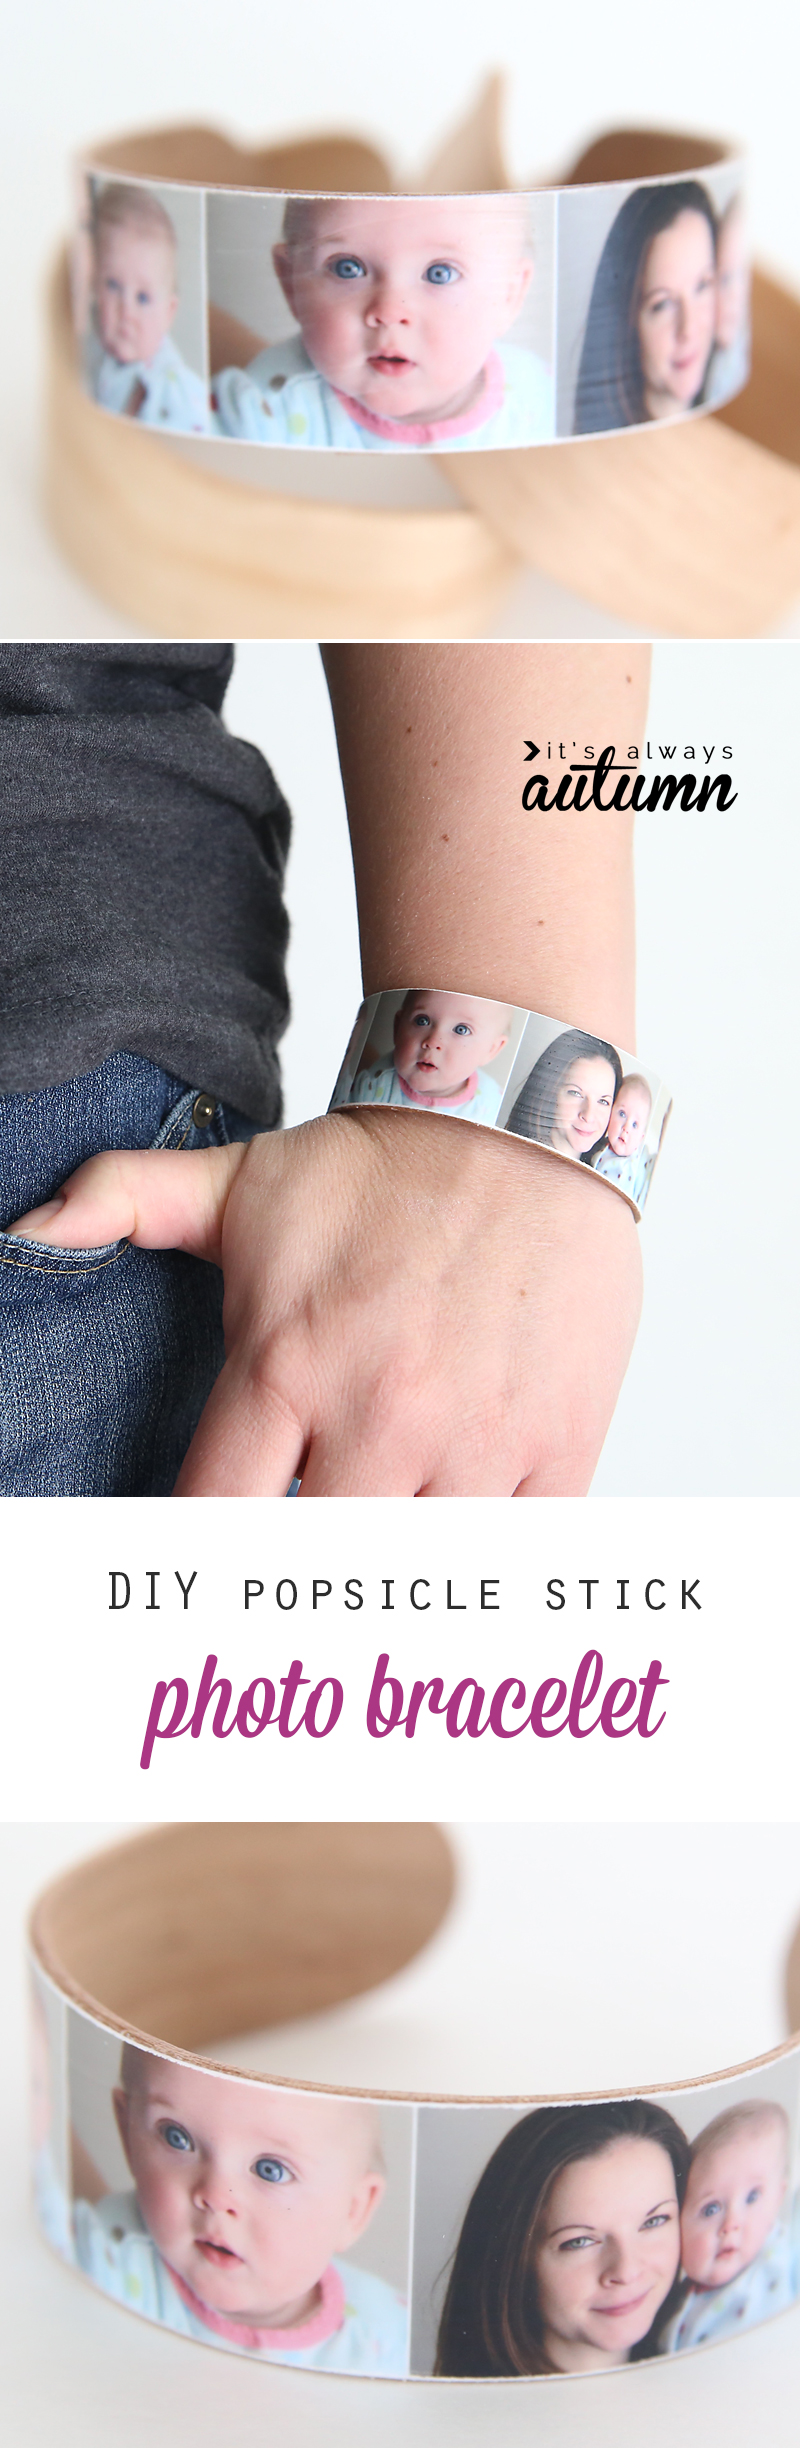 DIY Beaded Bracelets for Fourth of July (Or Any Time!) » Lovely Indeed